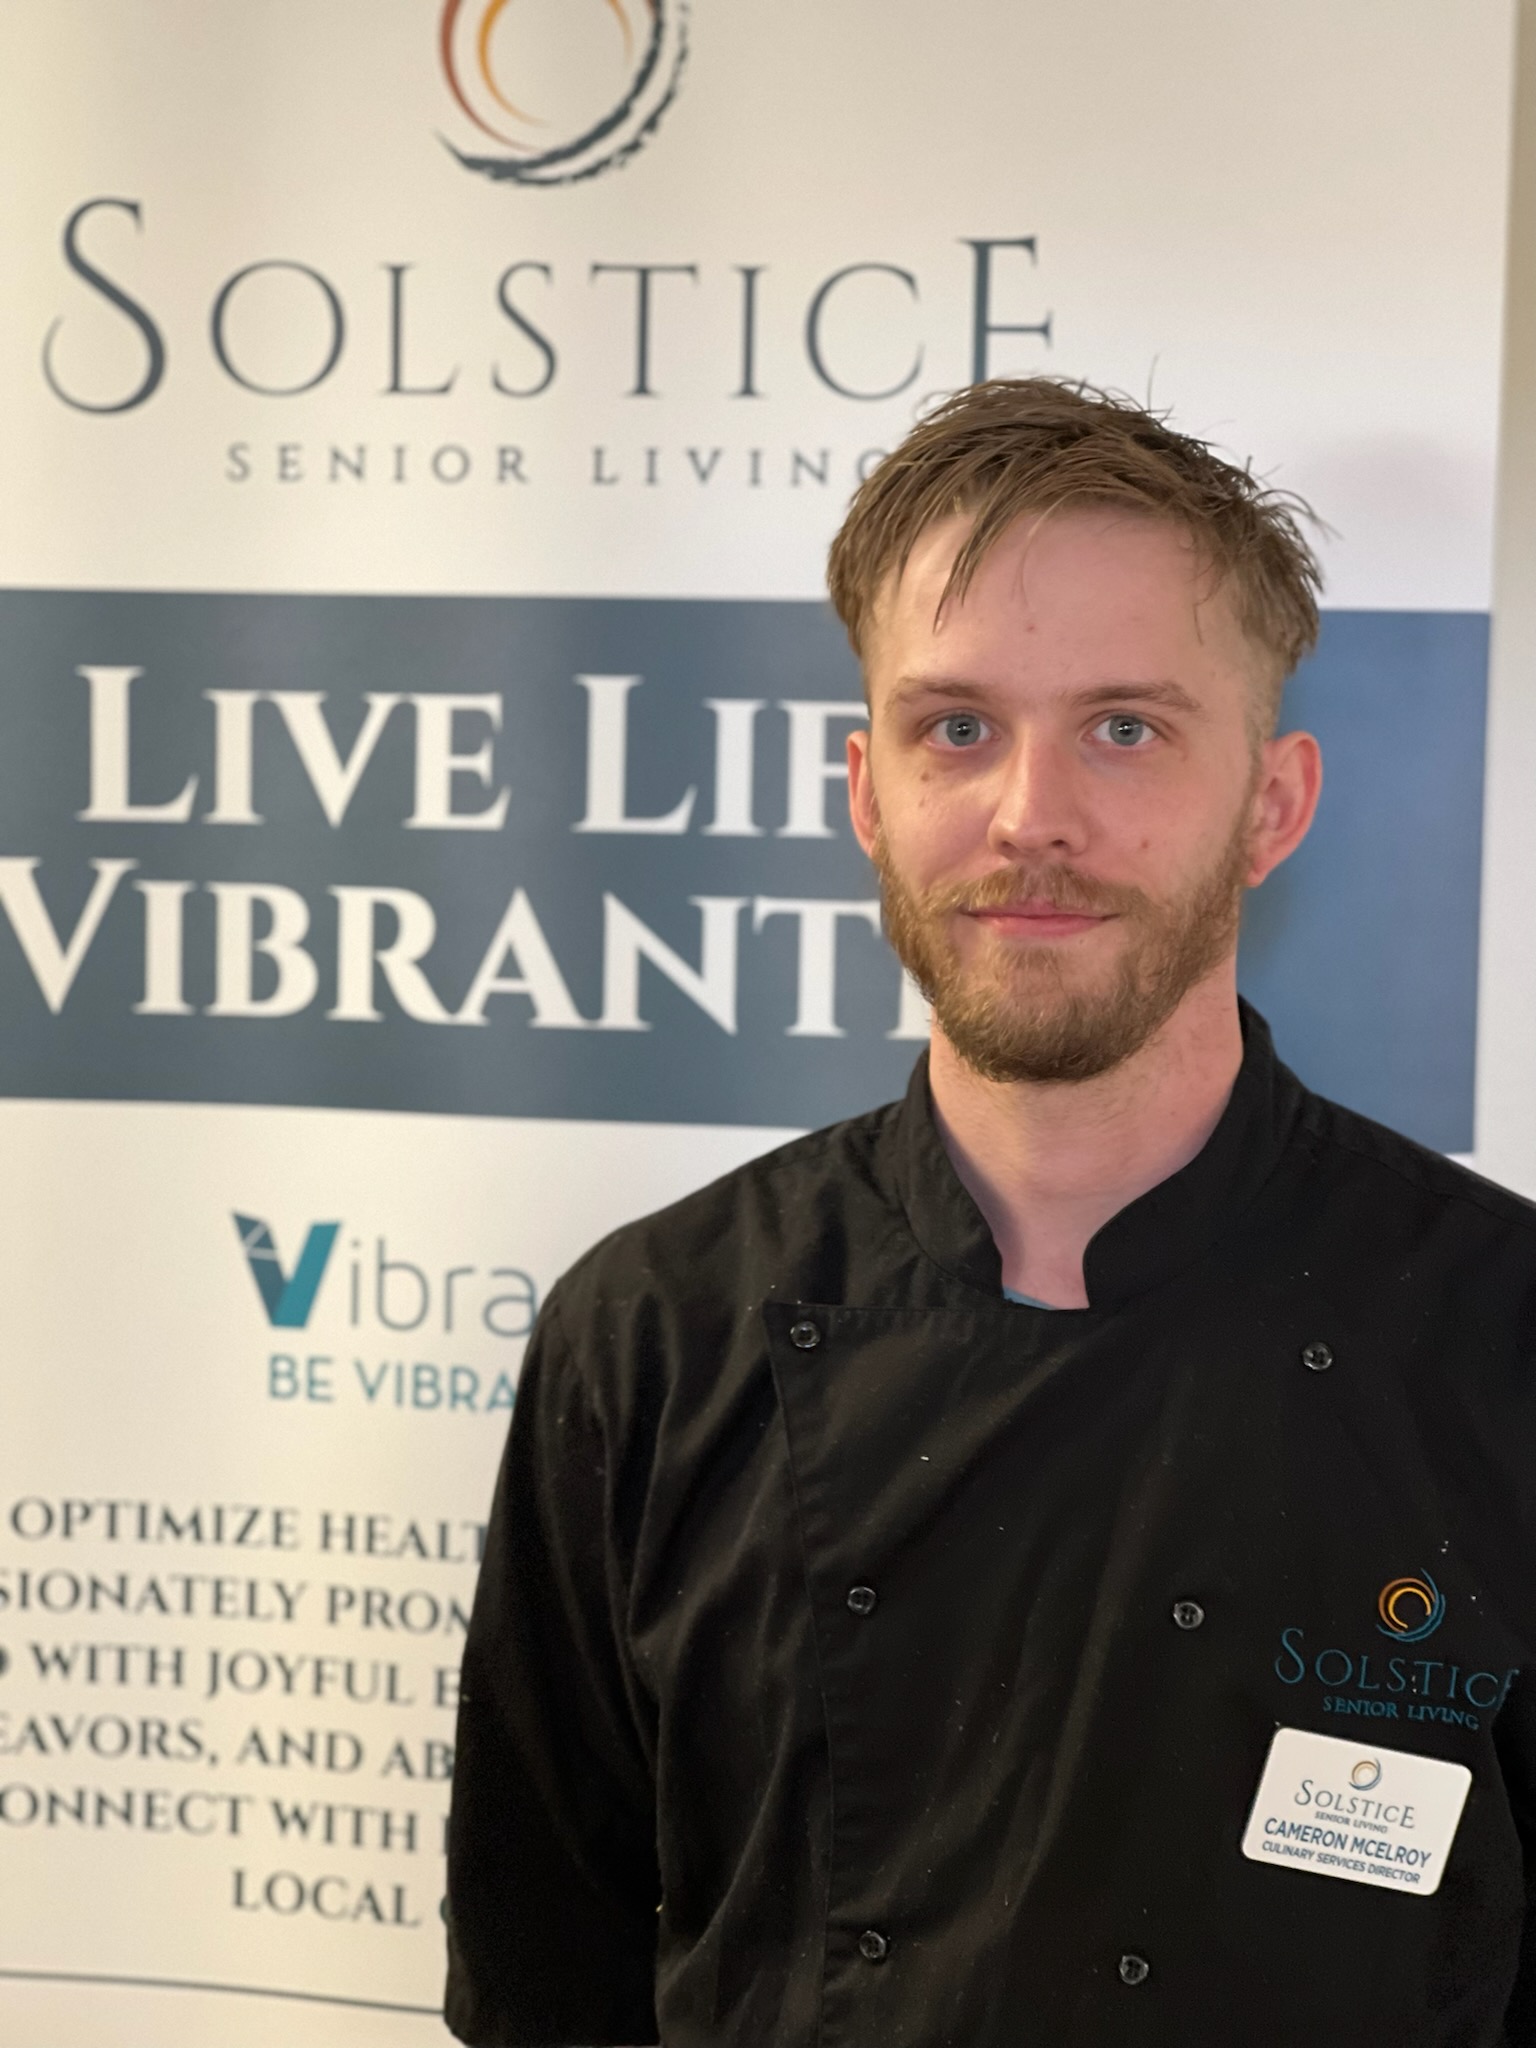 Cameron McElroy, Culinary Services Director, Solstice at Bangor